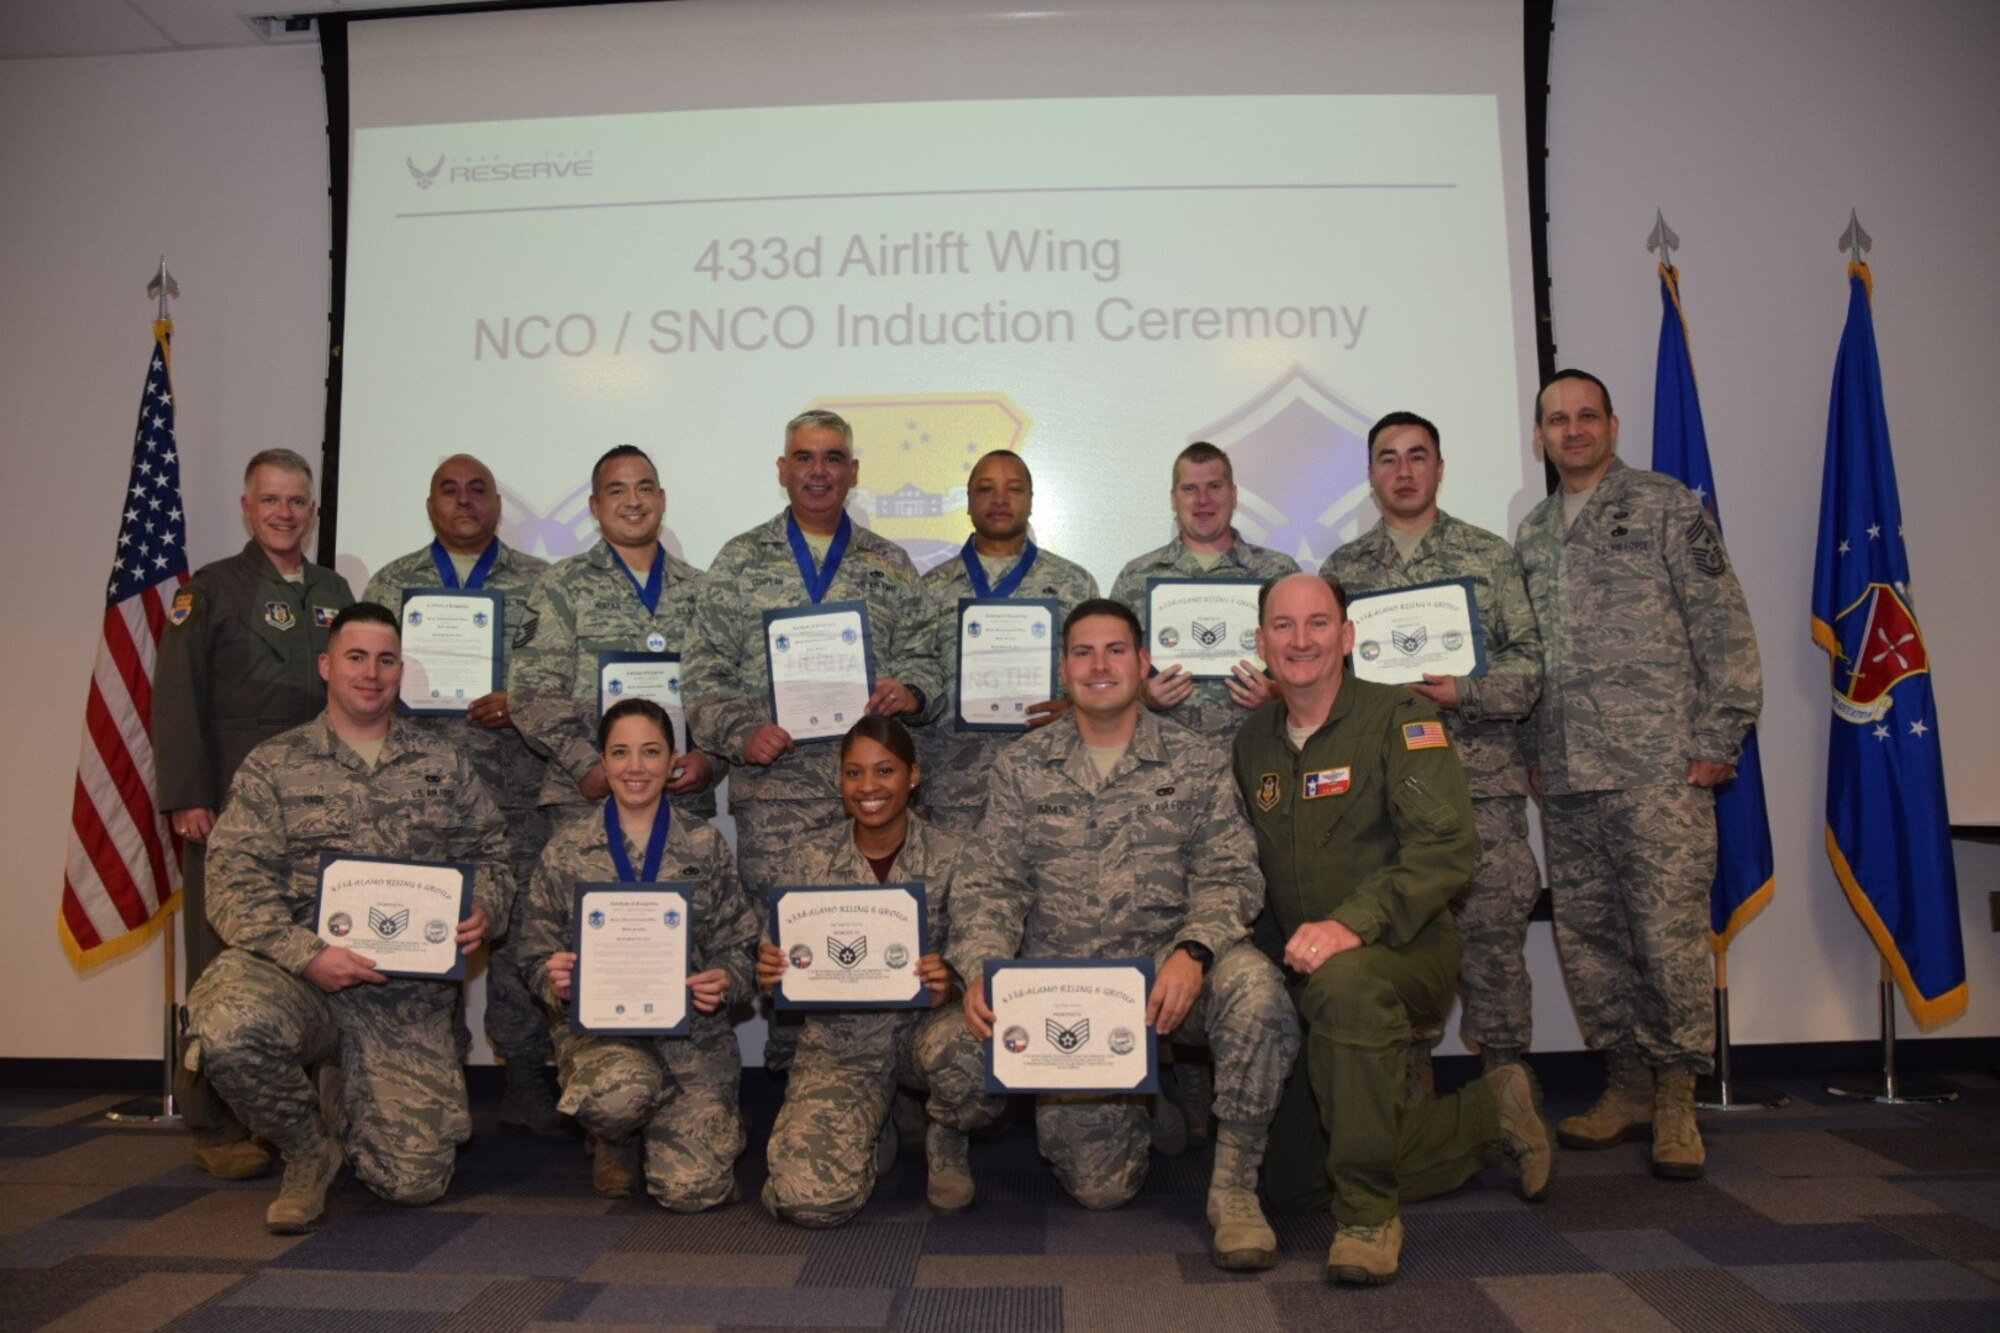 Col. Thomas K. Smith Jr.(bottom row, right), 433rd Airlift Wing commander, congratulated the 433rd Airlift Wing Senior NCO and NCO inductees during a ceremony , sponsored by The Alamo Wing Top 3 Association, Chief's Group, First Sergeants Council and Alamo Rising 6, at the Robert D. Gaylor NCO Academy here 20 Jan 2018.  Smith encouraged the newly inducted Airmen to continue professionally progressing. (U.S. Air Force photo by Tech Sgt. Carlos J. Treviño)